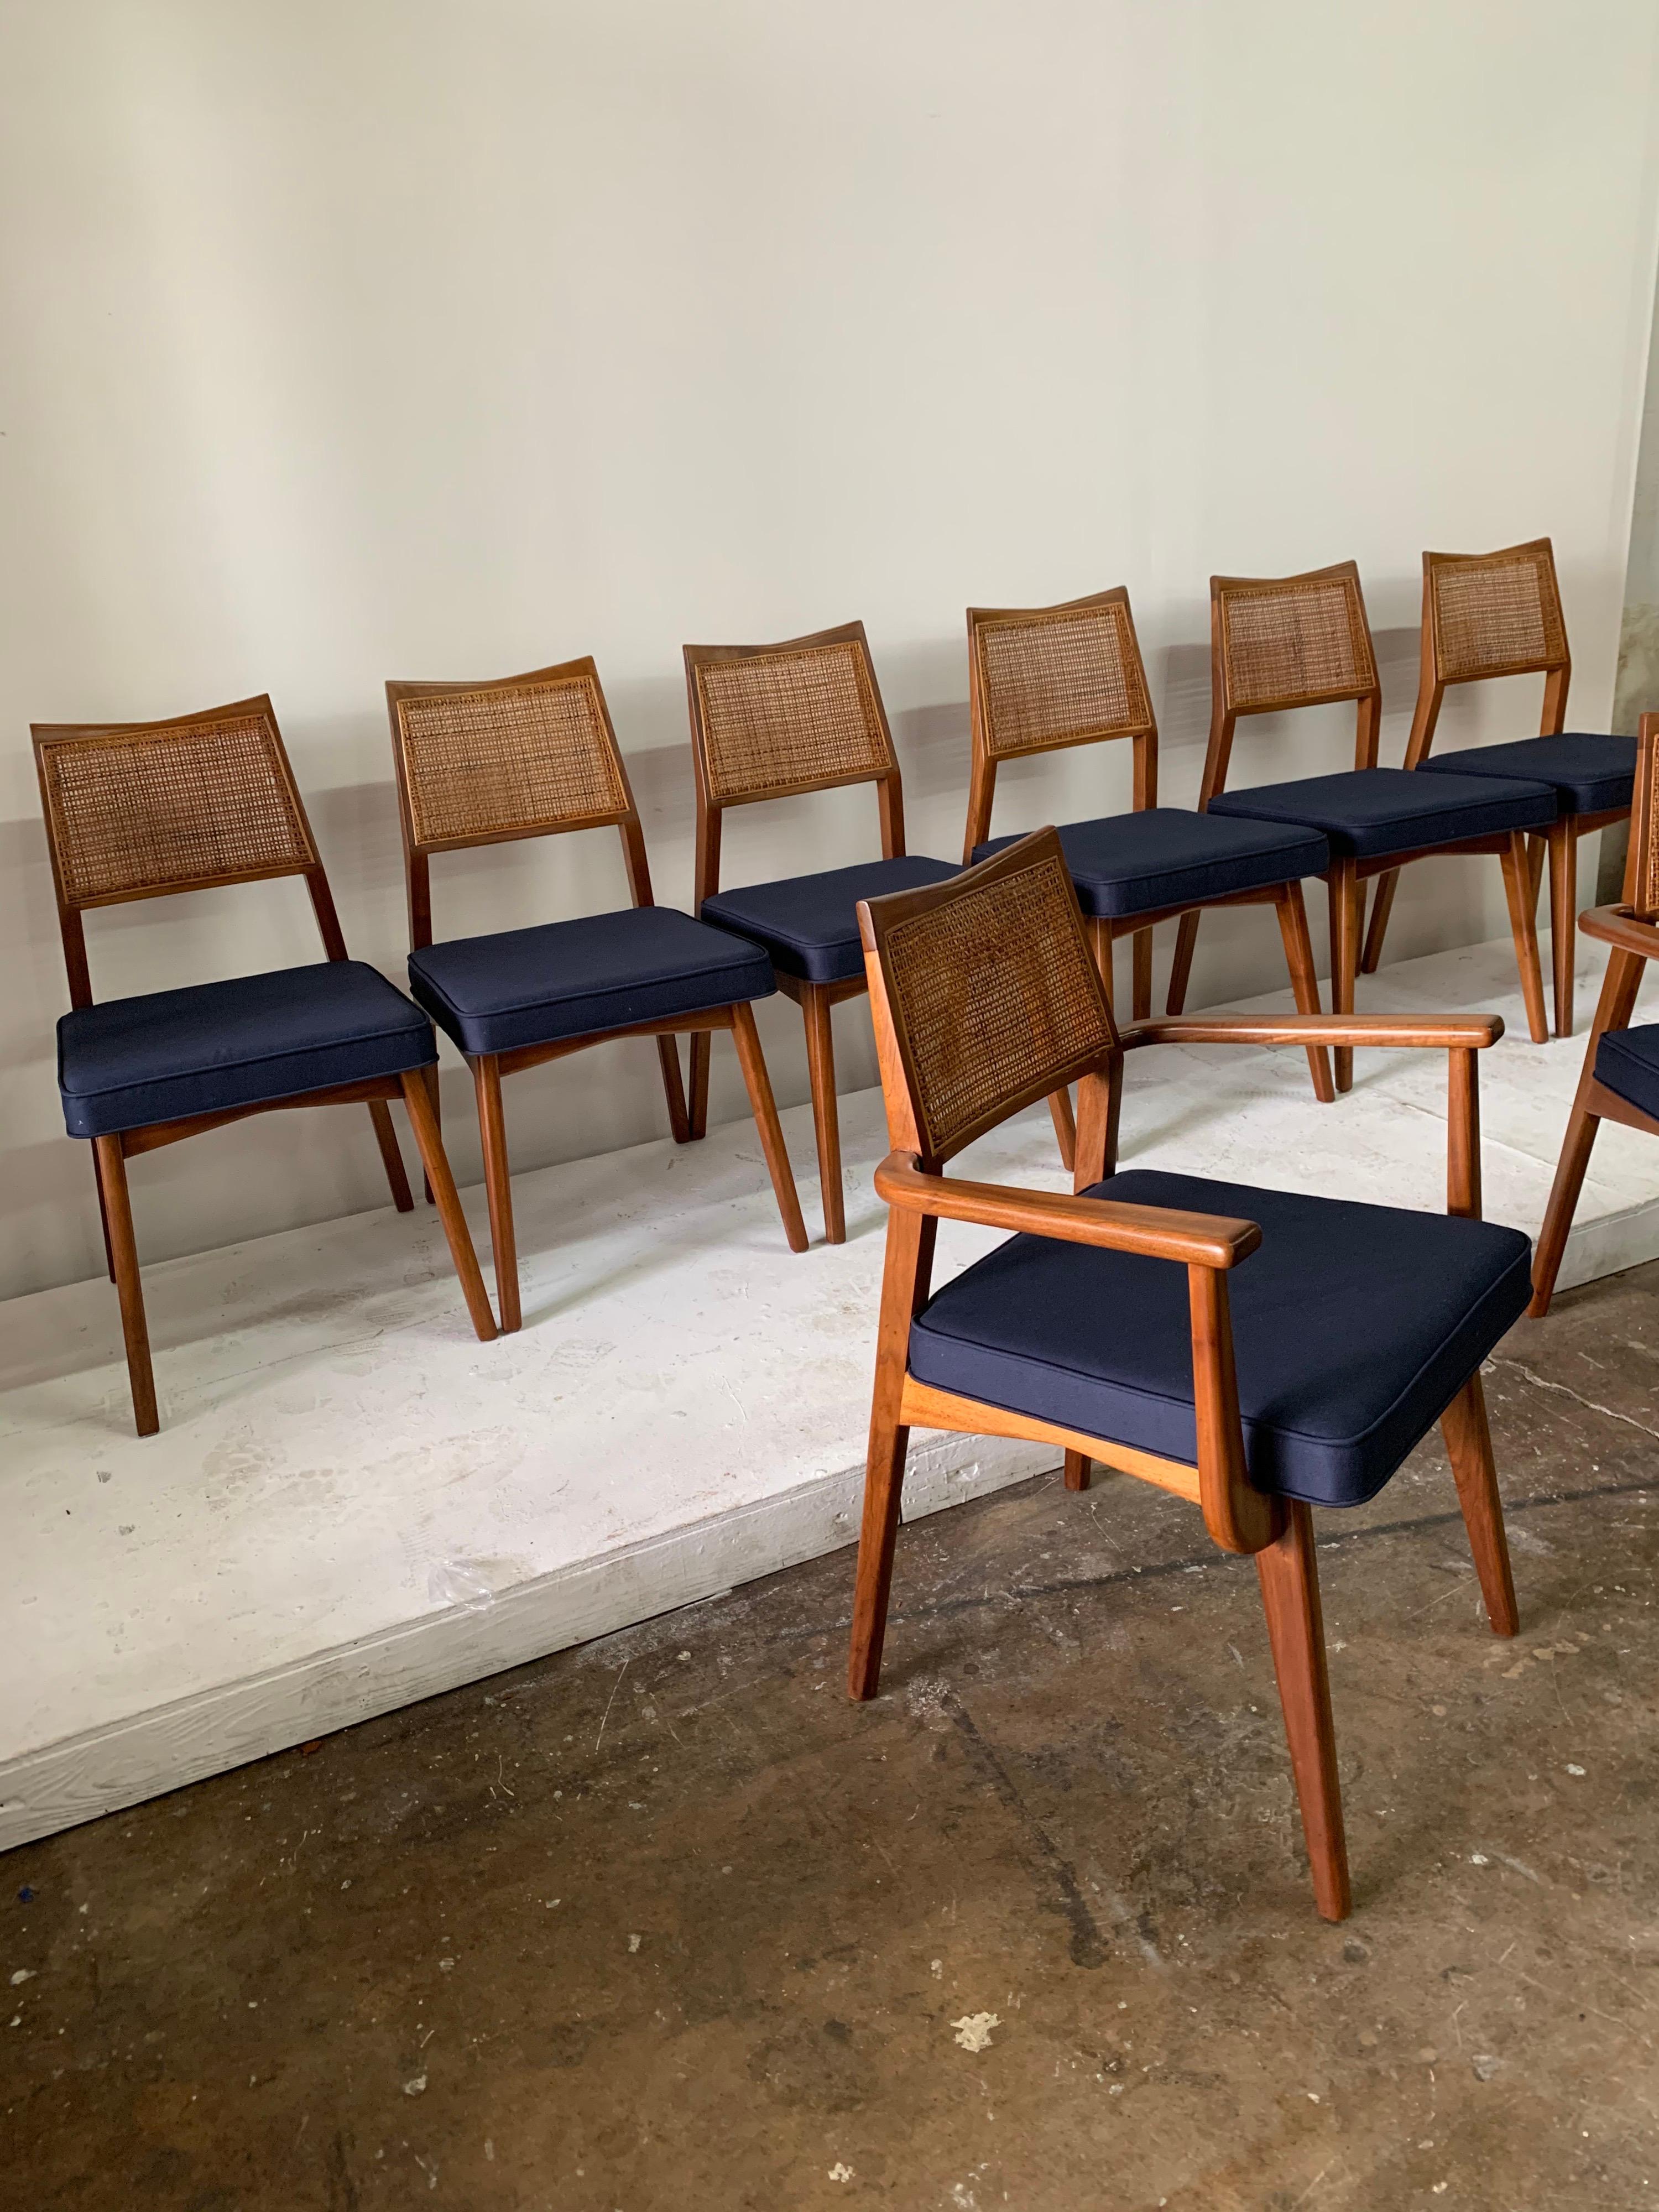 Eight vintage walnut, original cane and navy blue cotton upholstered seats. Two armchairs for host and hostess, 6 armless guest chairs. Possible by Jens Risom; These compliment beautifully Nakashima or Prouve furniture.

Note: dimensions of armed